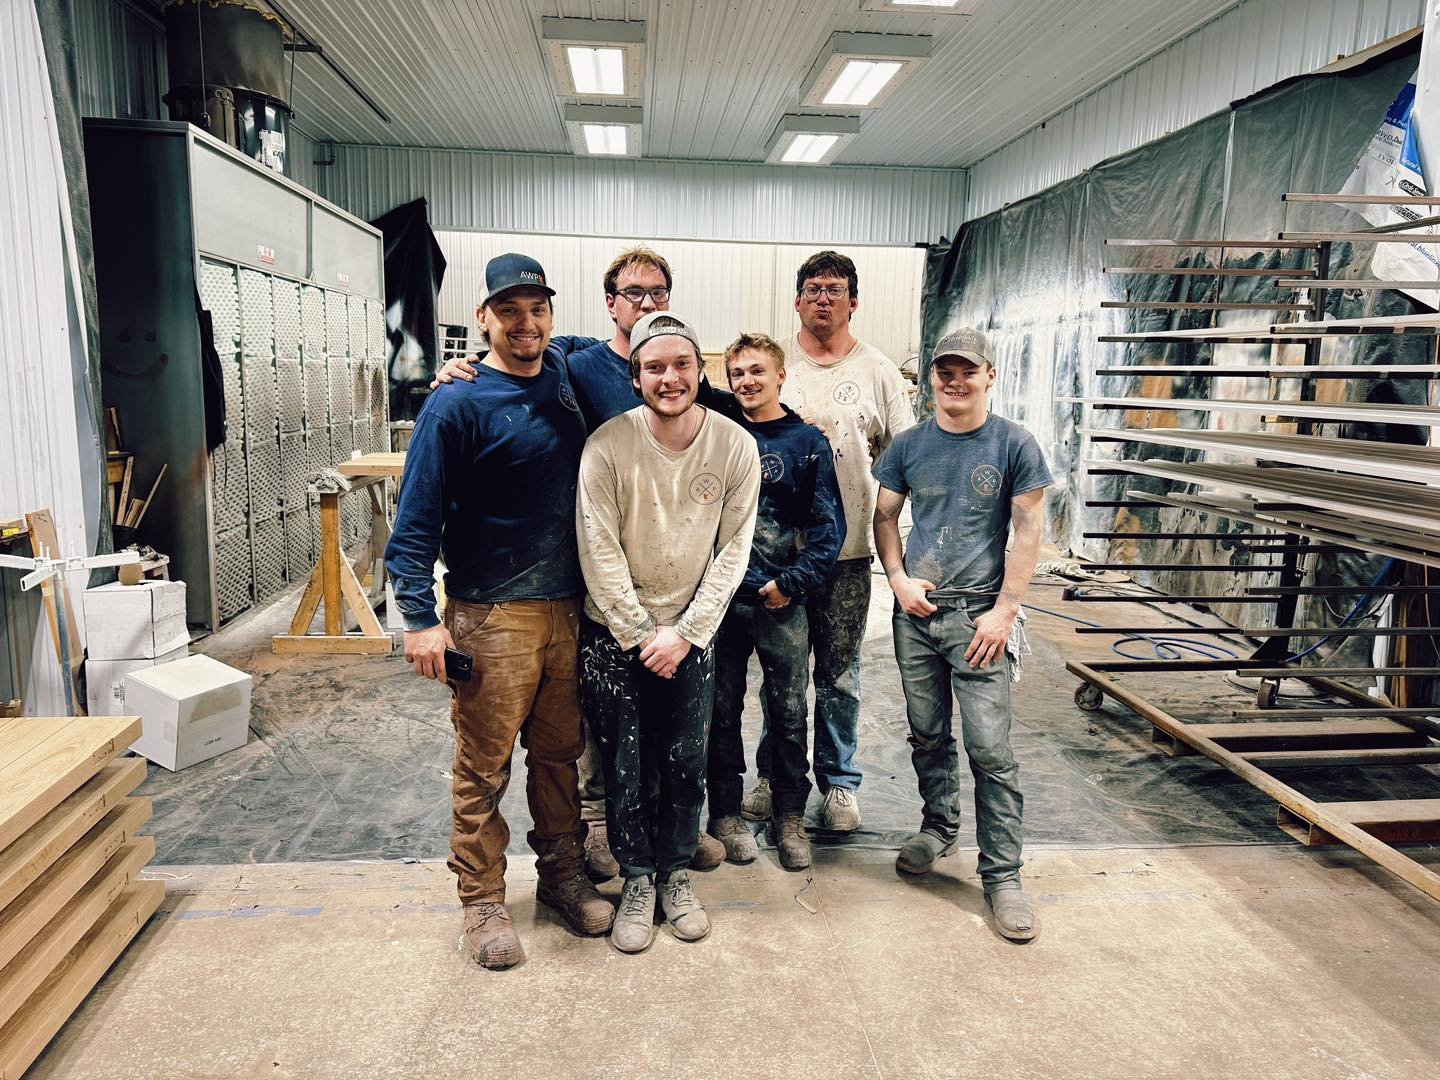 Doors, cabinets, siding, beams, interior logs - these goons did it all in a DAY. We've got one heck of a crew. If you want to join us, we are hiring! Give us a call or apply on our website. #AllWaysPainting

218-831-3844 | www.allwayspaintingmn.com